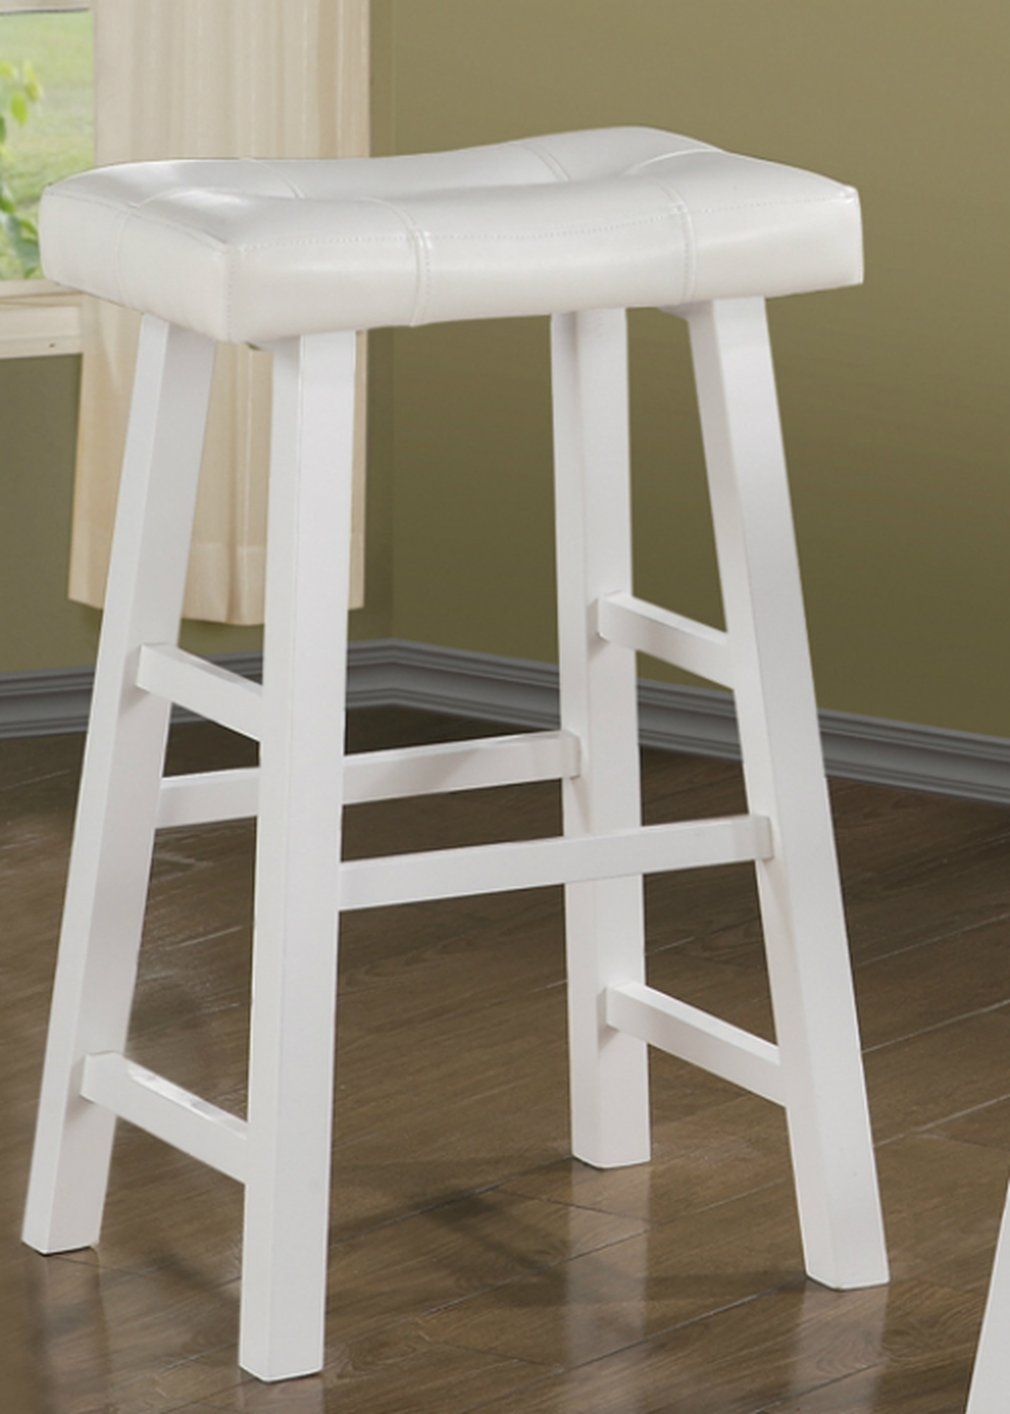 Set of 2, Country Series Counter Stool - 24"H - in White Finish with Faux Leather